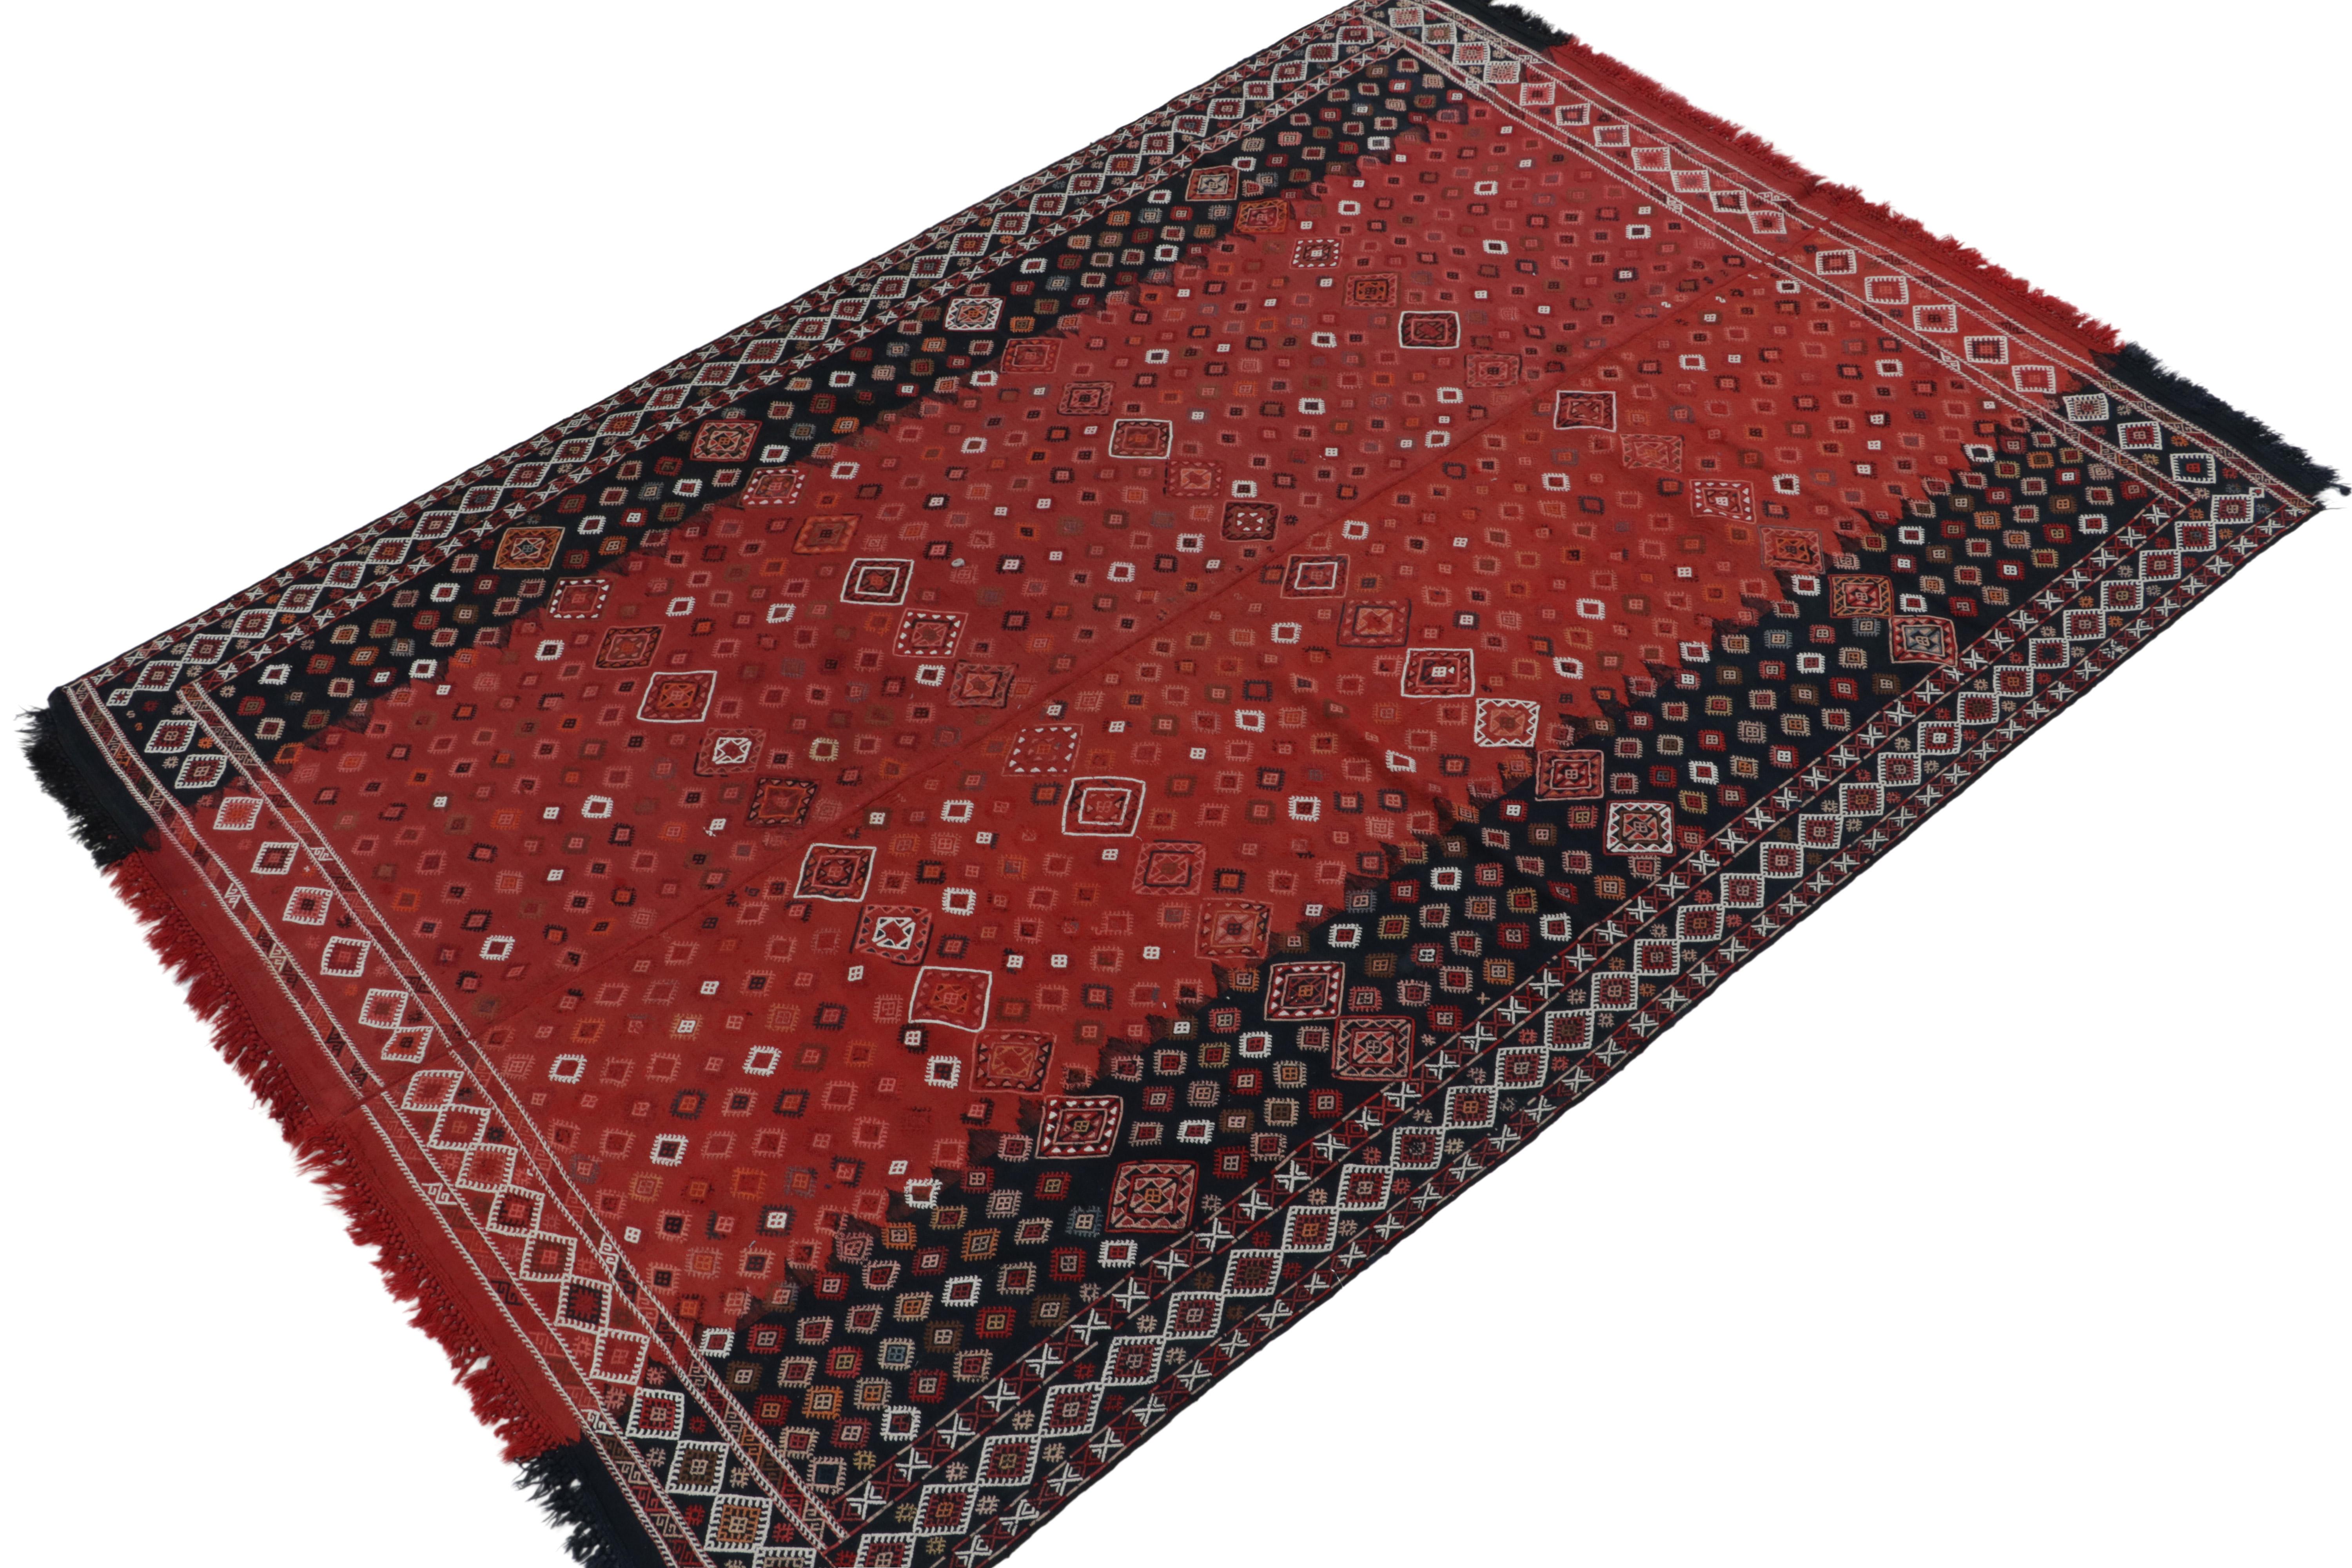 Handwoven in wool from Russia originating between 1890-1900, a 7x10 antique Verneh kilim enjoying an individualistic personality & impeccable artistic interpretations. The masterpiece exemplifies tribal Caucasian aesthetics with utmost rarity for